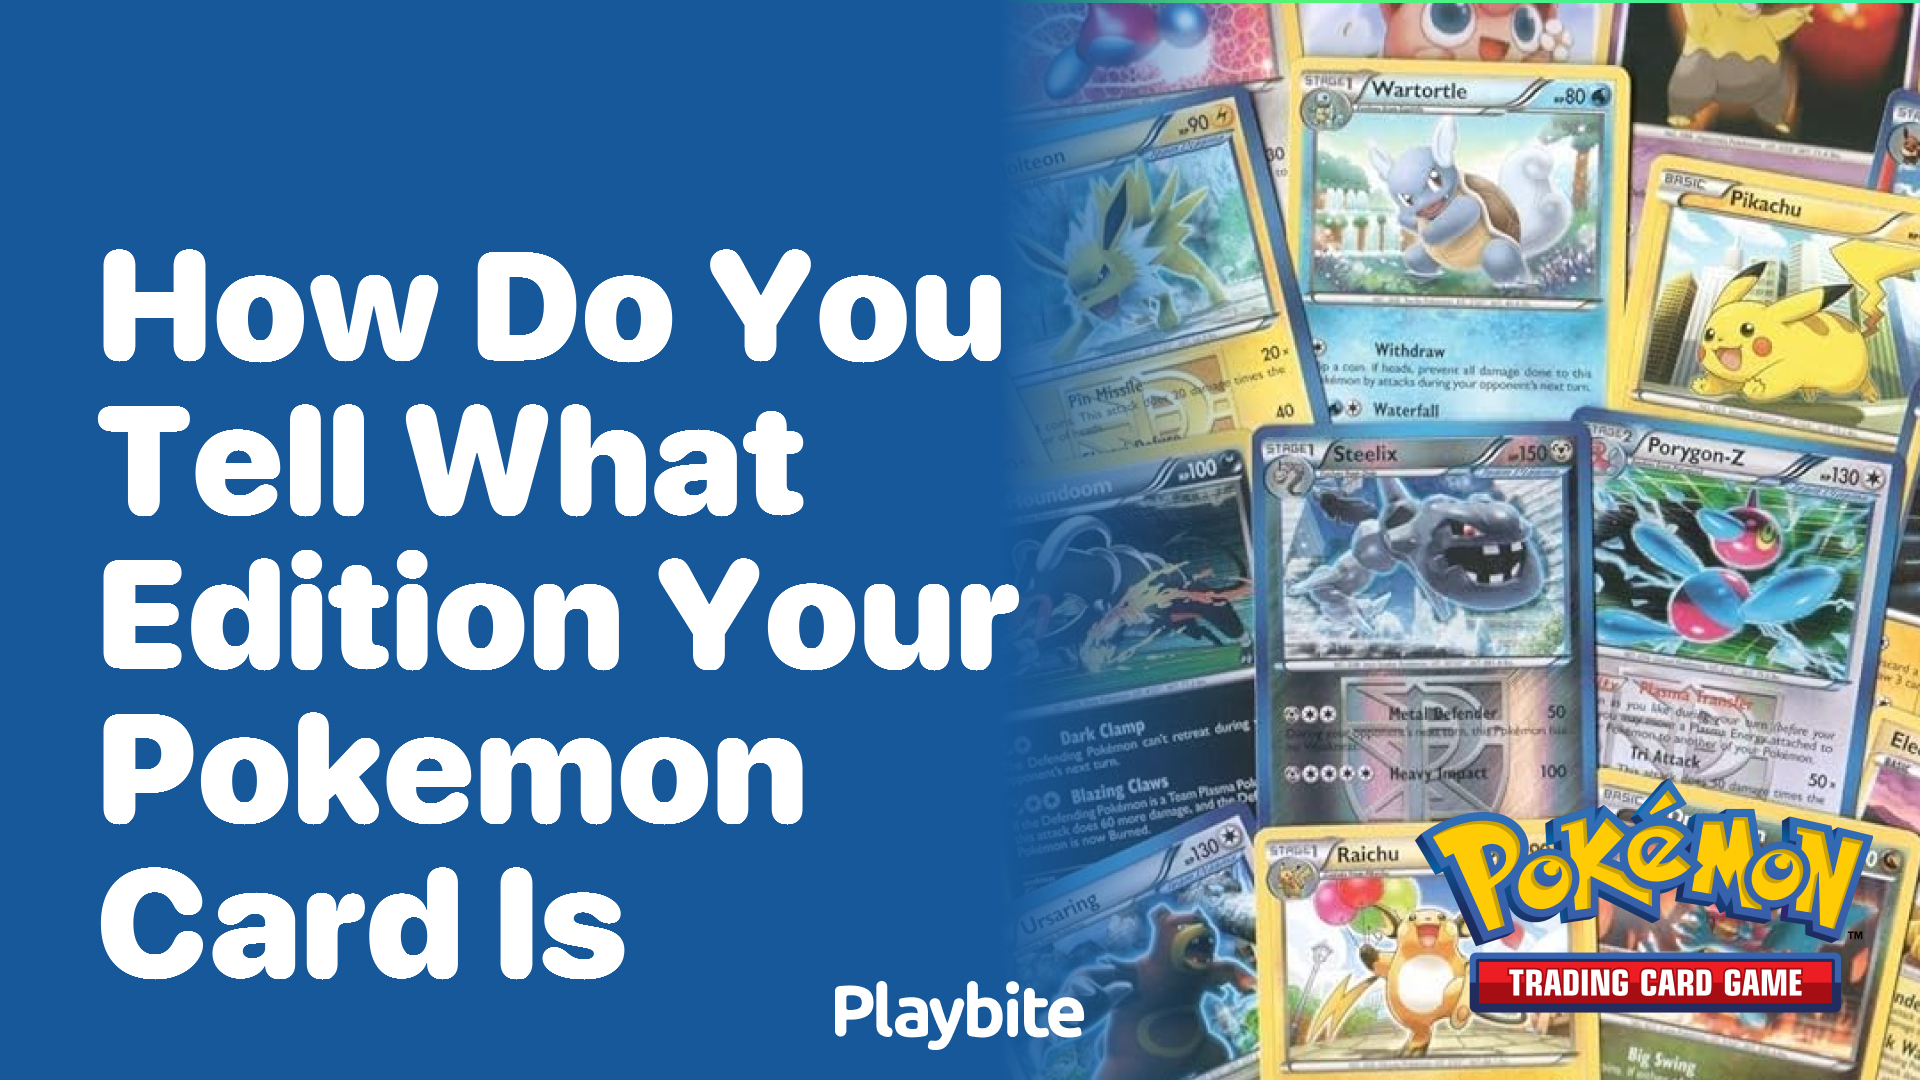 How do you tell what edition your Pokemon card is?